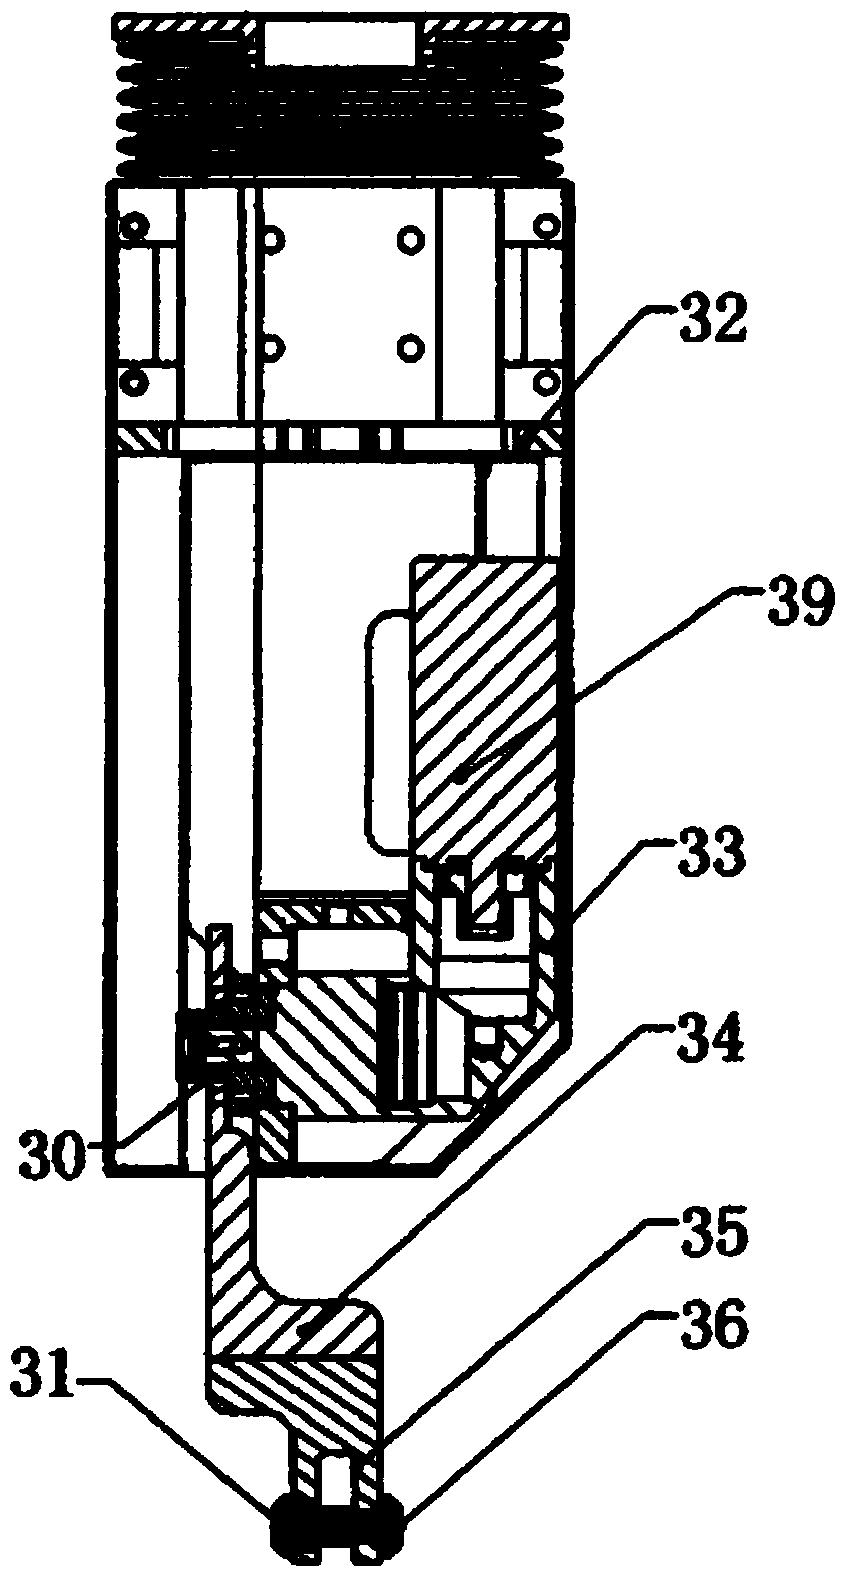 Groove cutting device of sliding adjustment cutting head with smoke sucking device